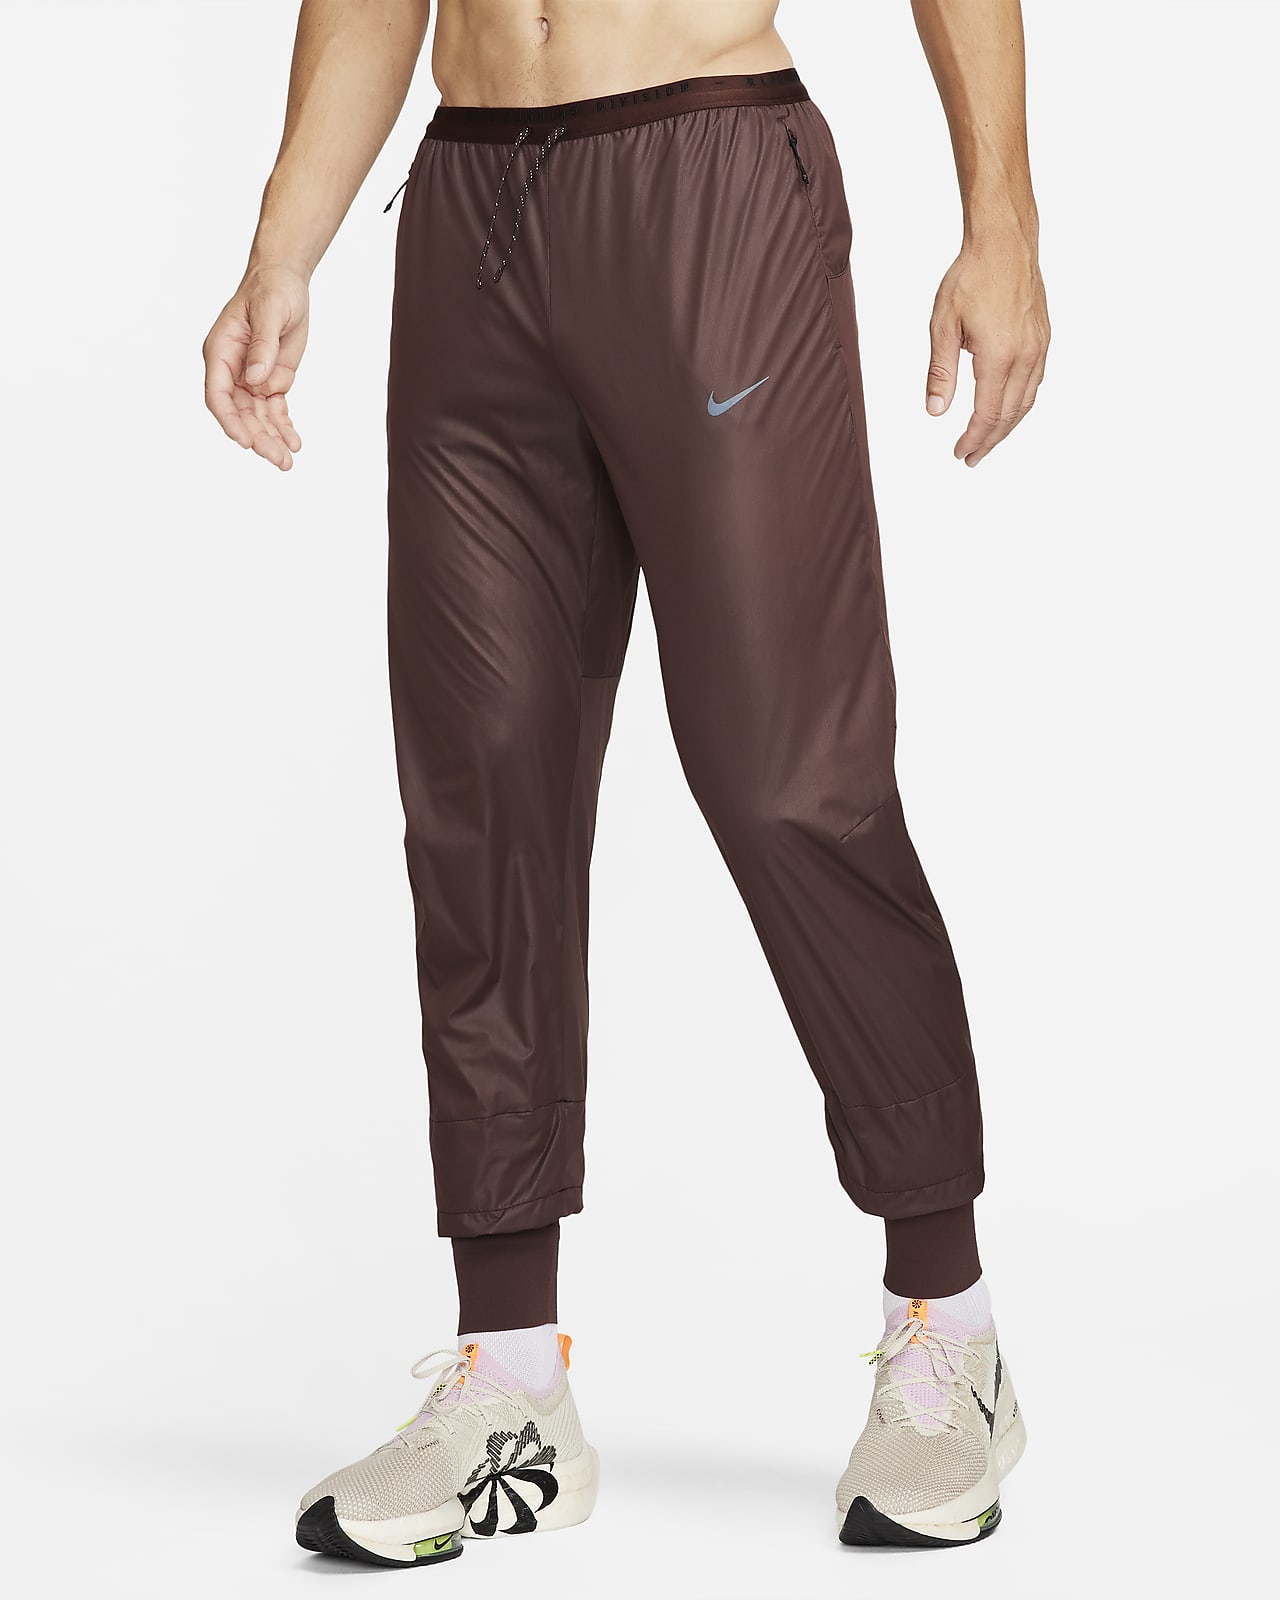 Nike Running Division Phenom Men's Storm-FIT Running Trousers. Nike AT